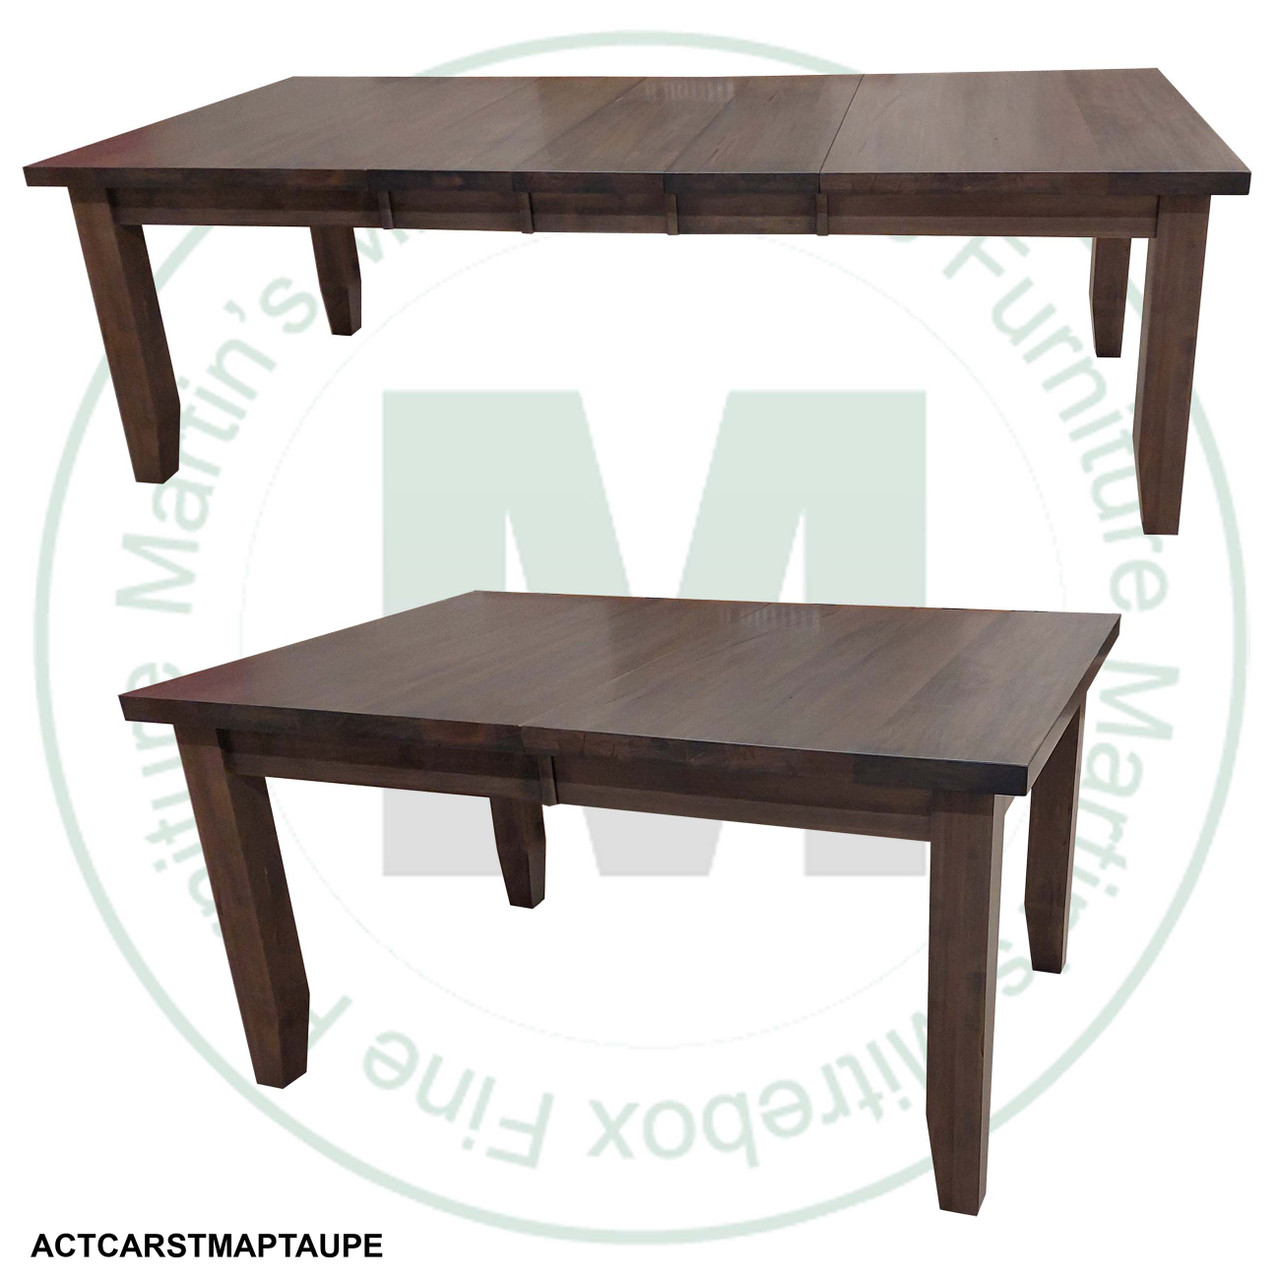 Maple Mansfield Extension Harvest Table 48''D x 48''W x 30''H With 3 - 12'' Leaves